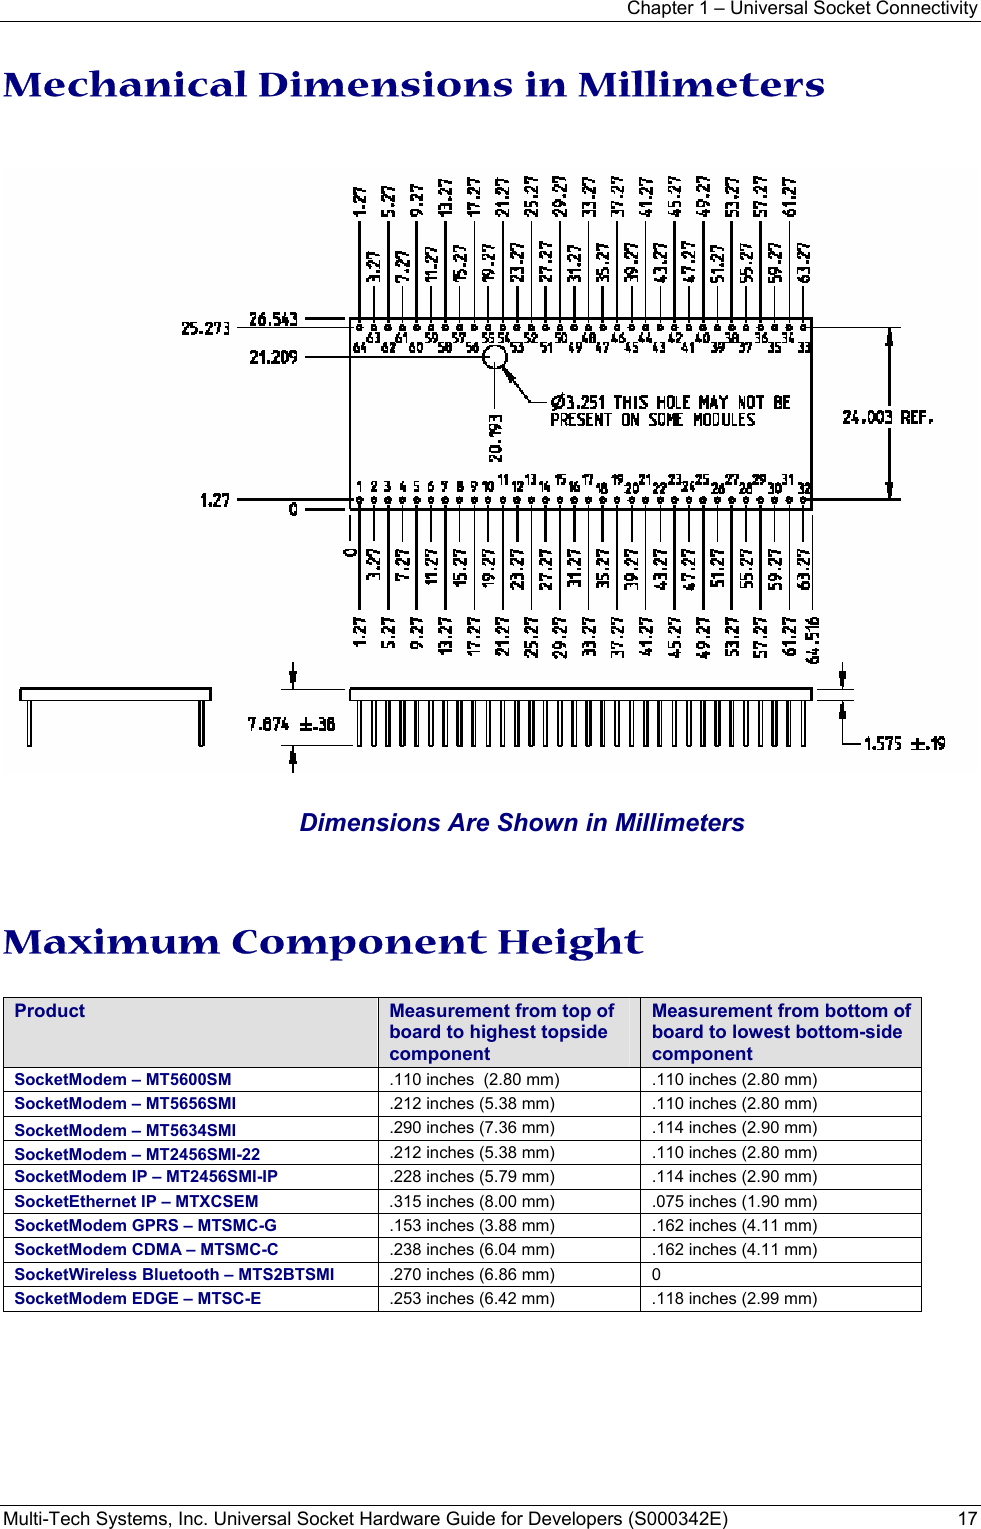 Chapter 1 – Universal Socket Connectivity Multi-Tech Systems, Inc. Universal Socket Hardware Guide for Developers (S000342E)  17  Mechanical Dimensions in Millimeters              Dimensions Are Shown in Millimeters   Maximum Component Height  Product  Measurement from top of board to highest topside component Measurement from bottom of board to lowest bottom-side component SocketModem – MT5600SM .110 inches  (2.80 mm) .110 inches (2.80 mm) SocketModem – MT5656SMI .212 inches (5.38 mm) .110 inches (2.80 mm) SocketModem – MT5634SMI  .290 inches (7.36 mm) .114 inches (2.90 mm) SocketModem – MT2456SMI-22  .212 inches (5.38 mm) .110 inches (2.80 mm) SocketModem IP – MT2456SMI-IP .228 inches (5.79 mm) .114 inches (2.90 mm) SocketEthernet IP – MTXCSEM .315 inches (8.00 mm) .075 inches (1.90 mm) SocketModem GPRS – MTSMC-G .153 inches (3.88 mm) .162 inches (4.11 mm) SocketModem CDMA – MTSMC-C .238 inches (6.04 mm)  .162 inches (4.11 mm) SocketWireless Bluetooth – MTS2BTSMI .270 inches (6.86 mm) 0 SocketModem EDGE – MTSC-E  .253 inches (6.42 mm)  .118 inches (2.99 mm)   